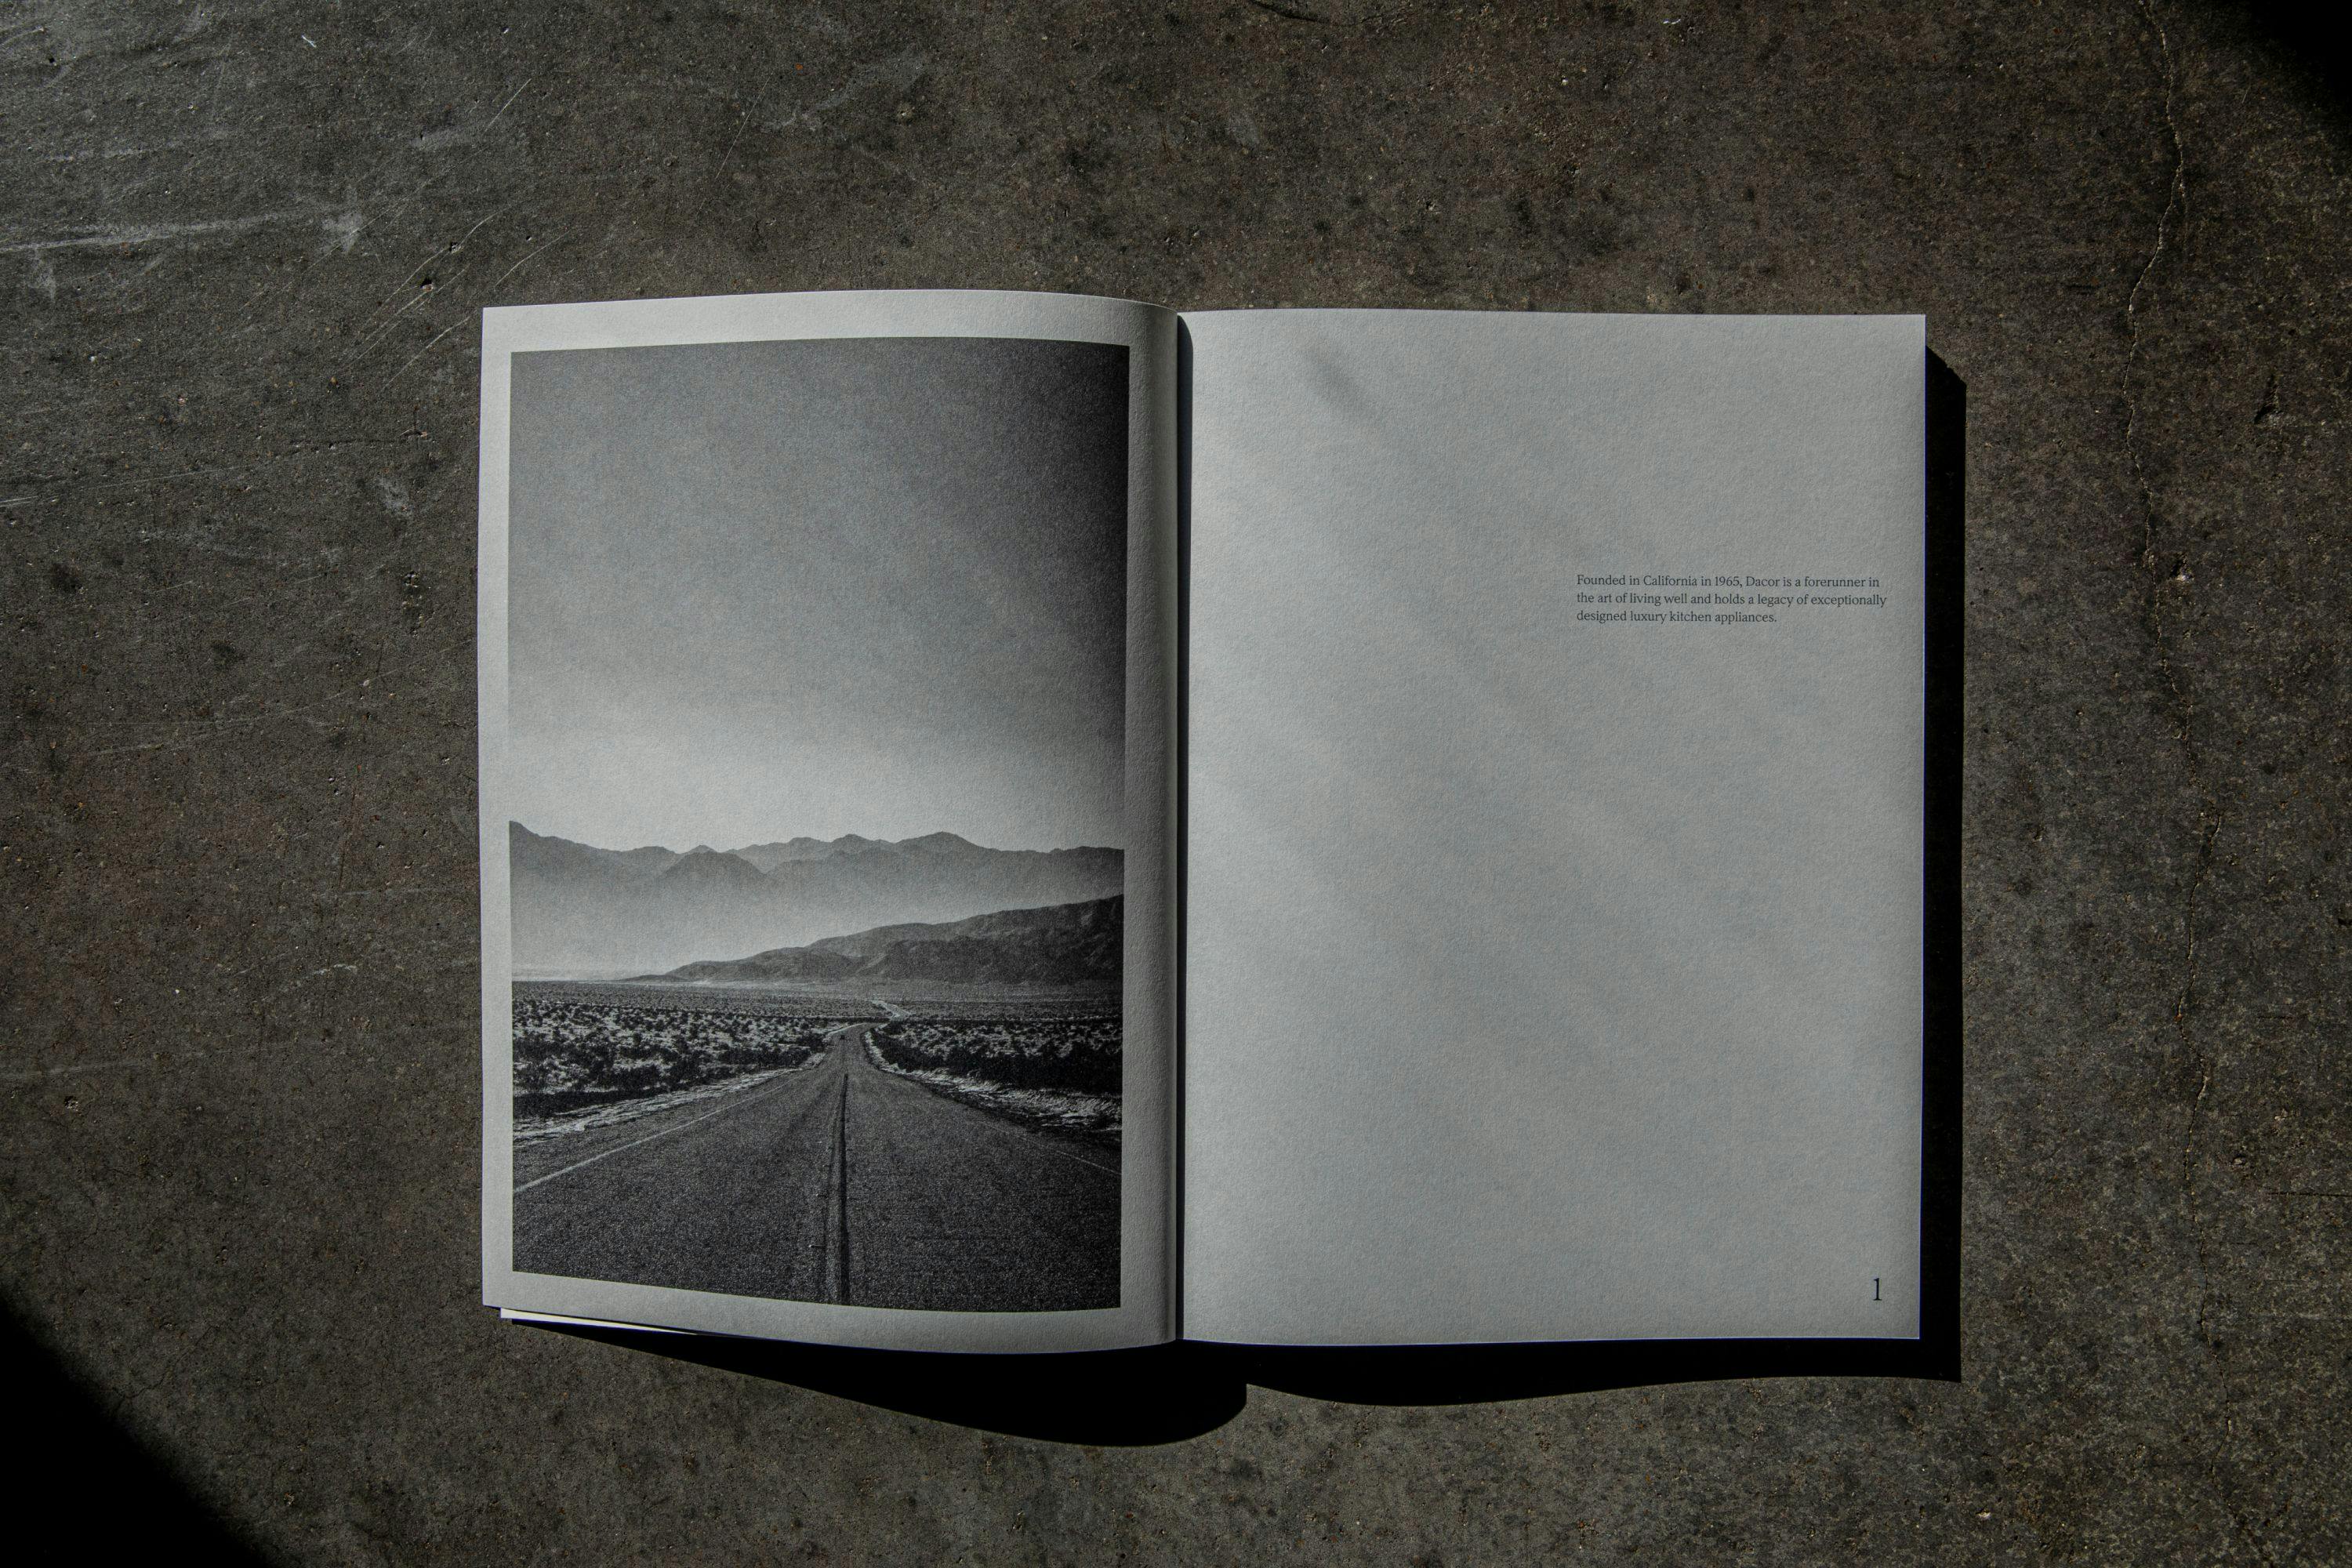 Black and white photo of a mountain road in a catalog